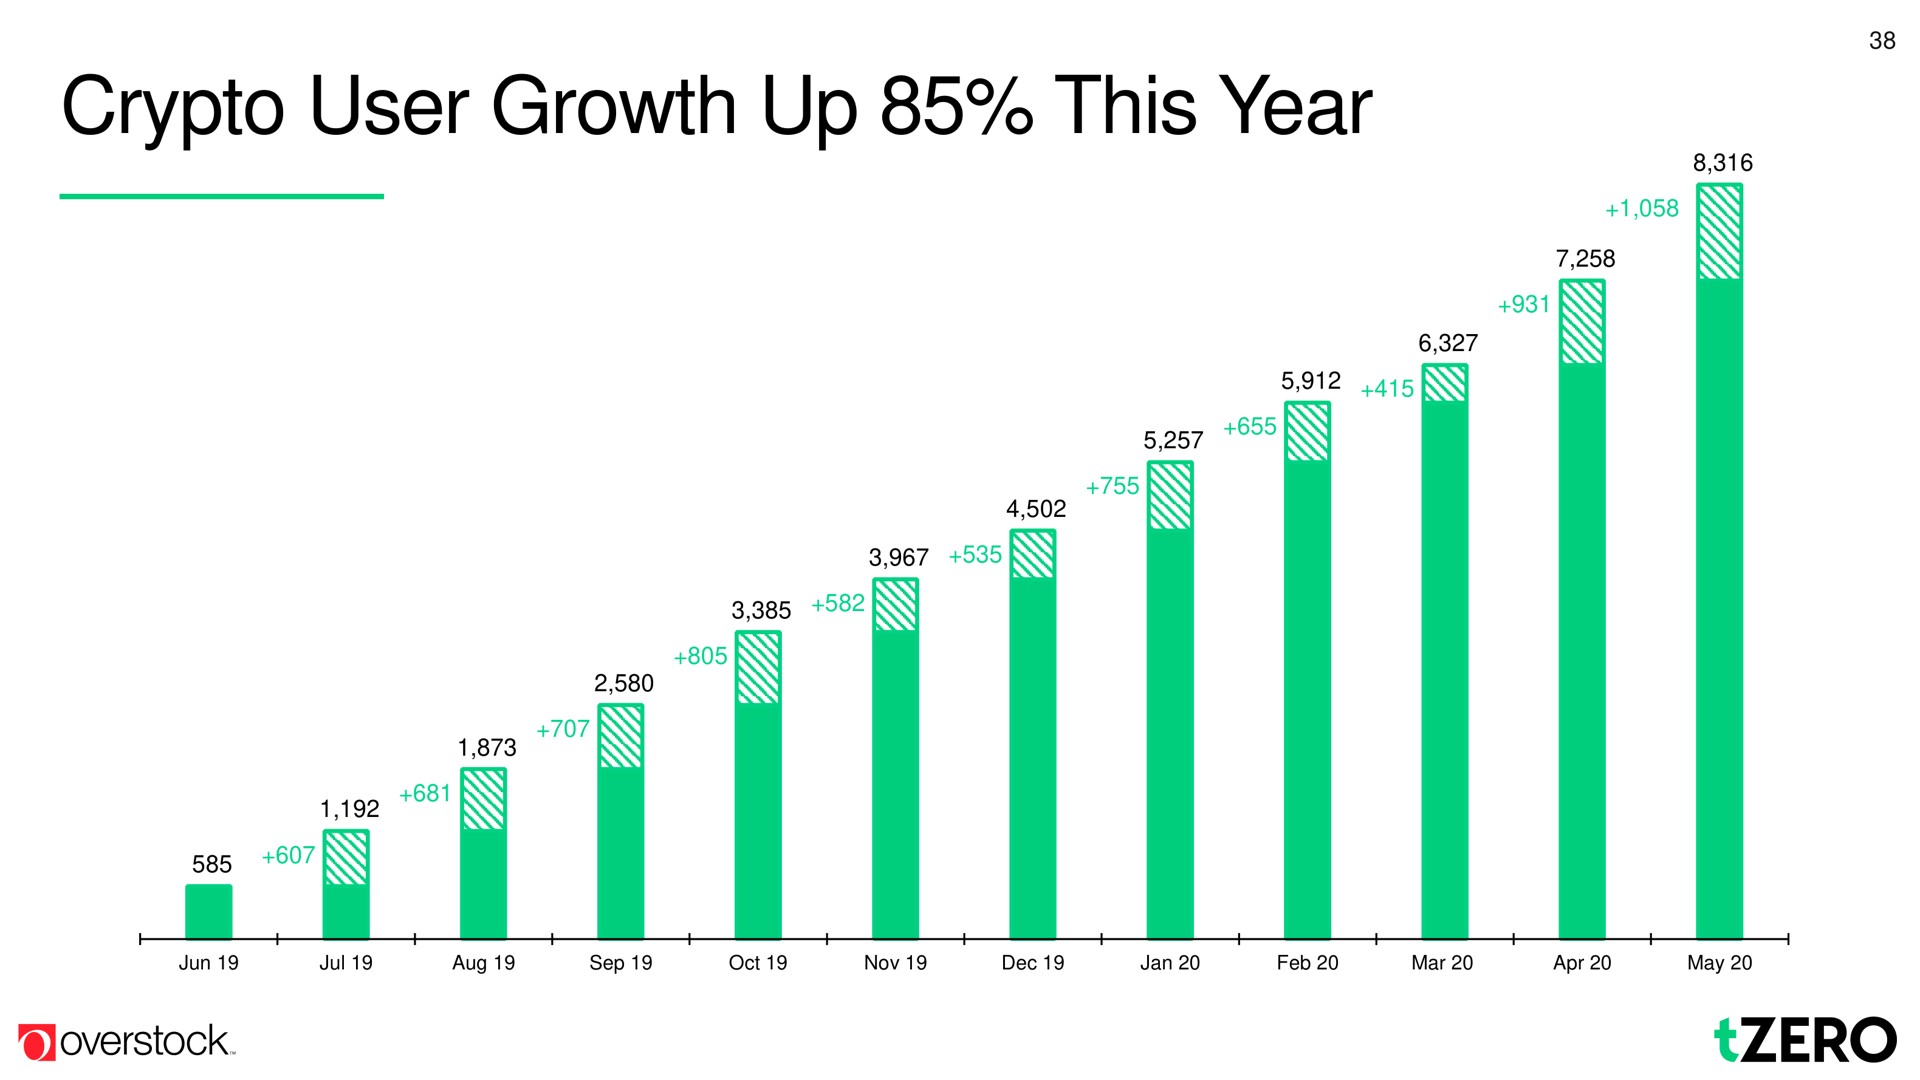 user growth up this year | Overstock